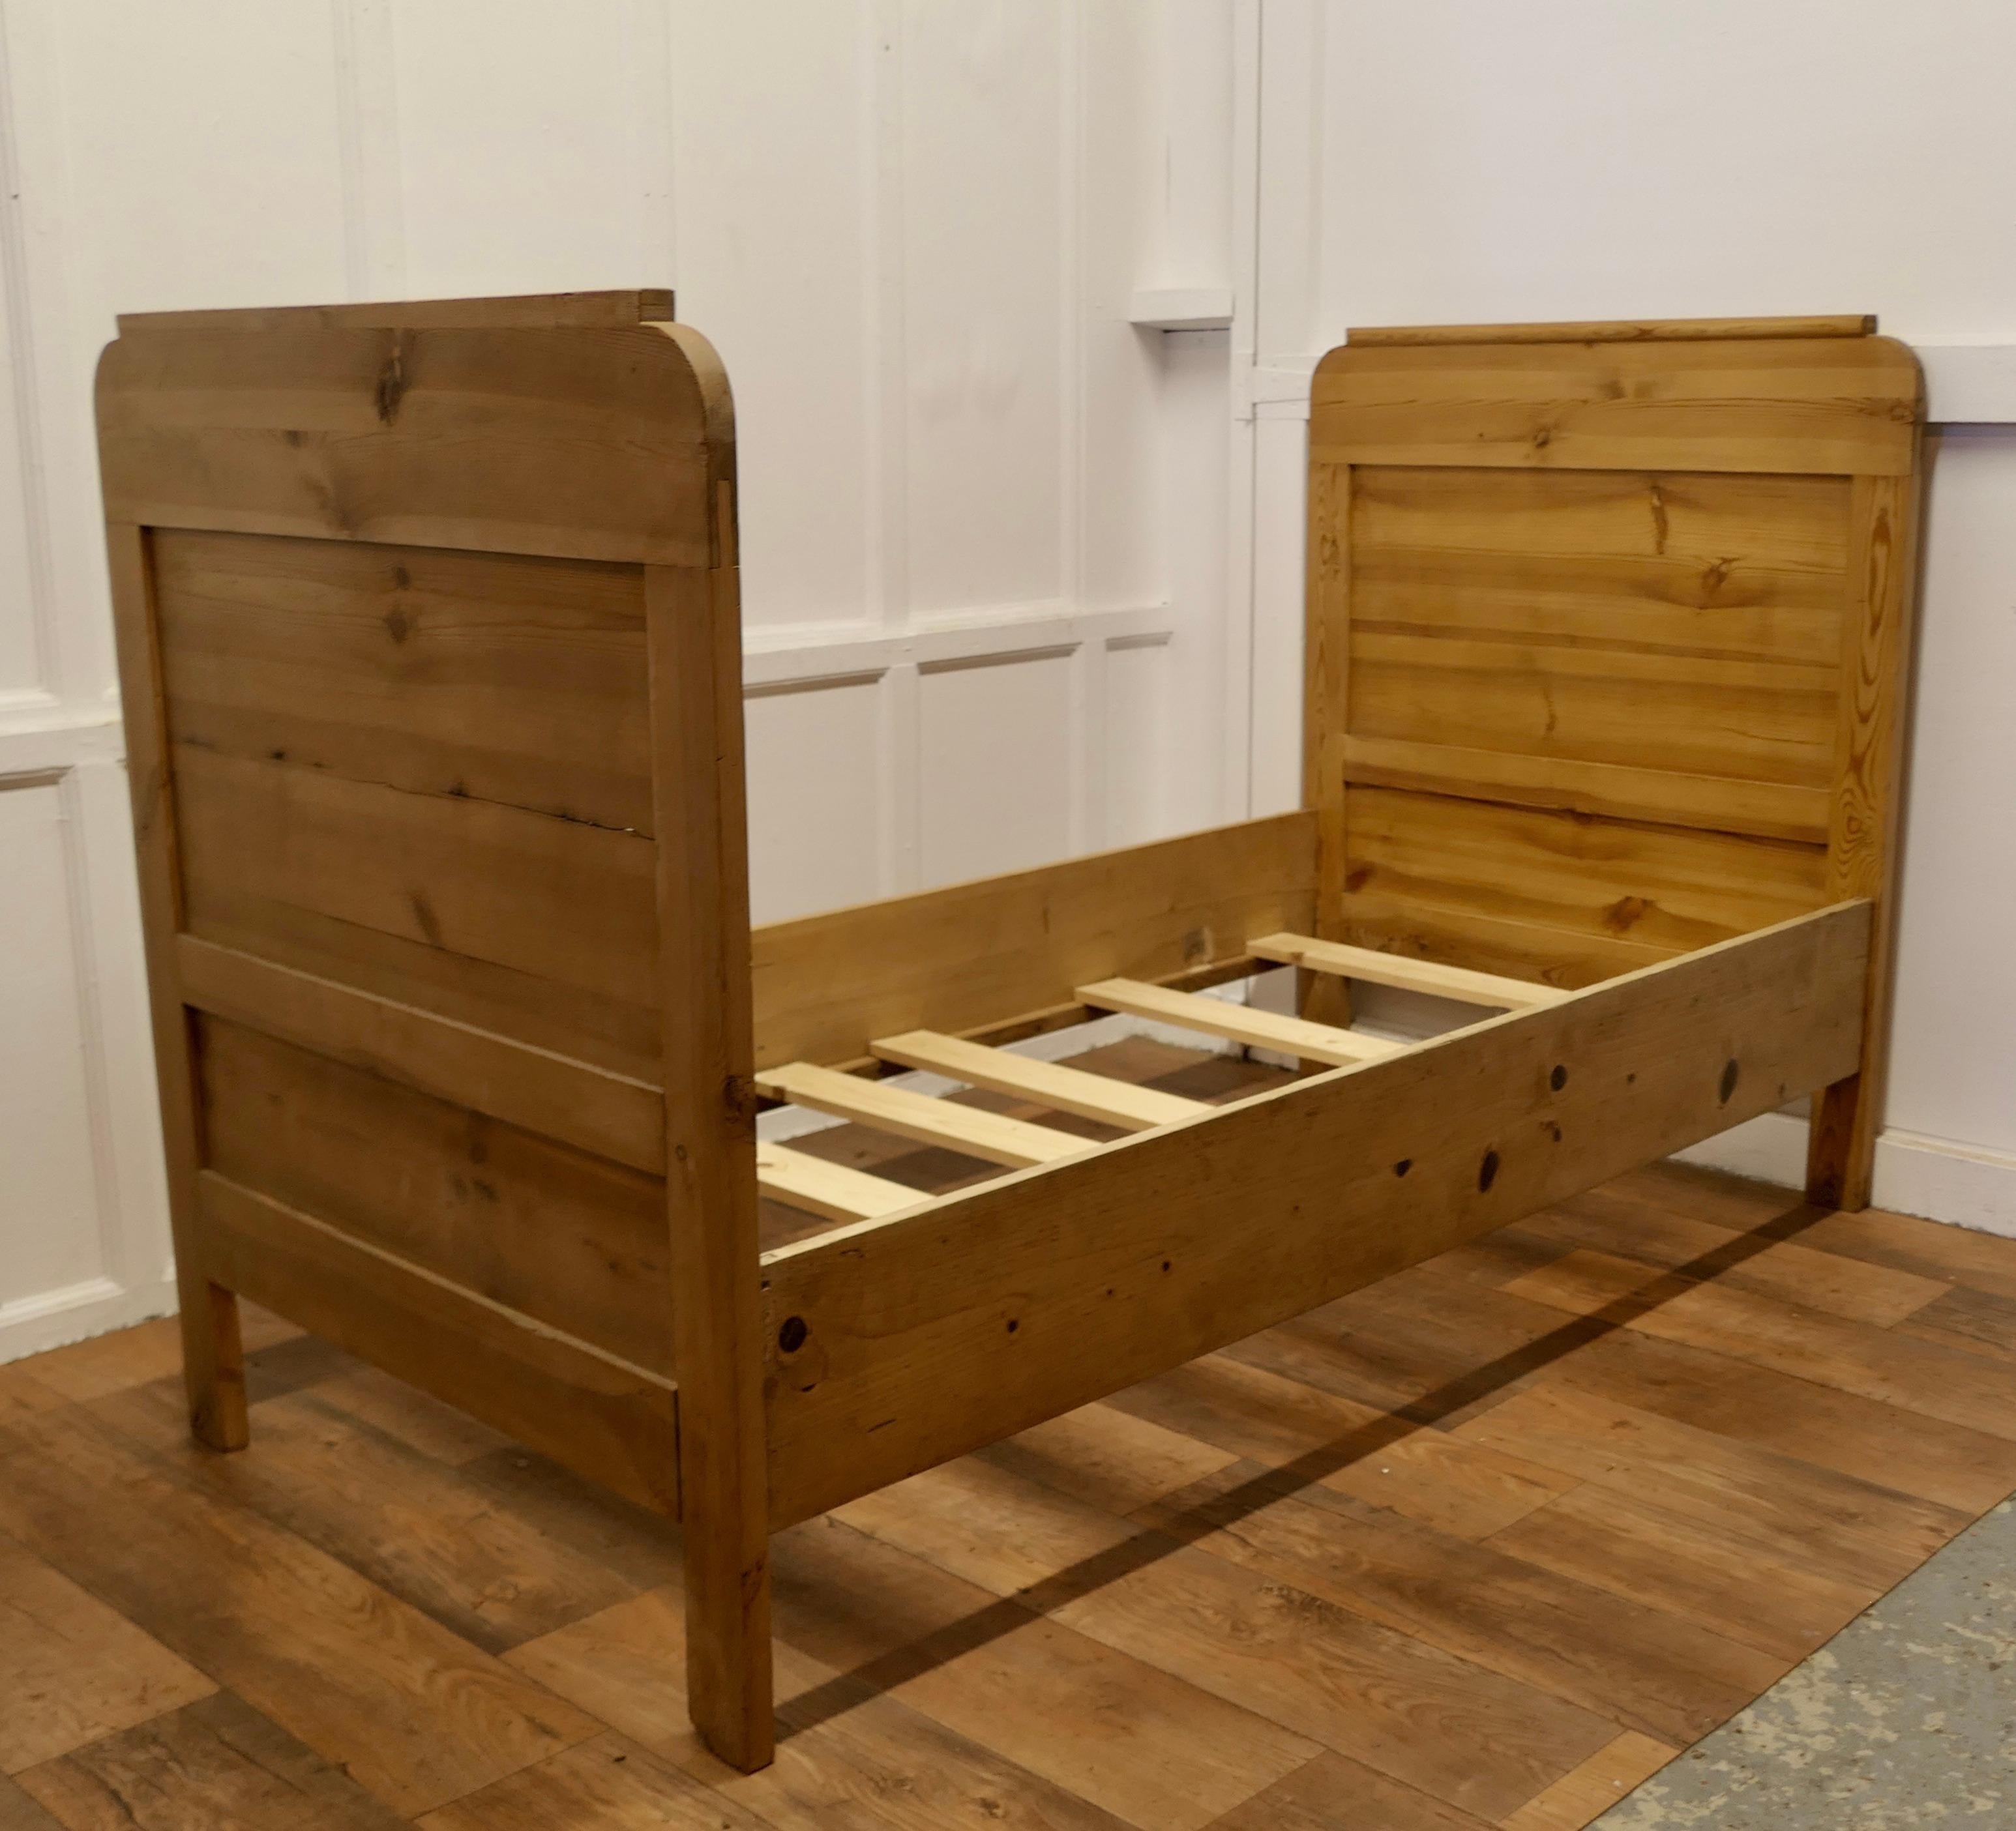 French Pine Single Sleigh Bed Lit Bateau

A 19th Century French Rustic Pine single sleigh bed
This is a good solid piece of Pine Furniture, it is made from good quality pine and has high head and Foot boards

The bed is in good sound condition, it